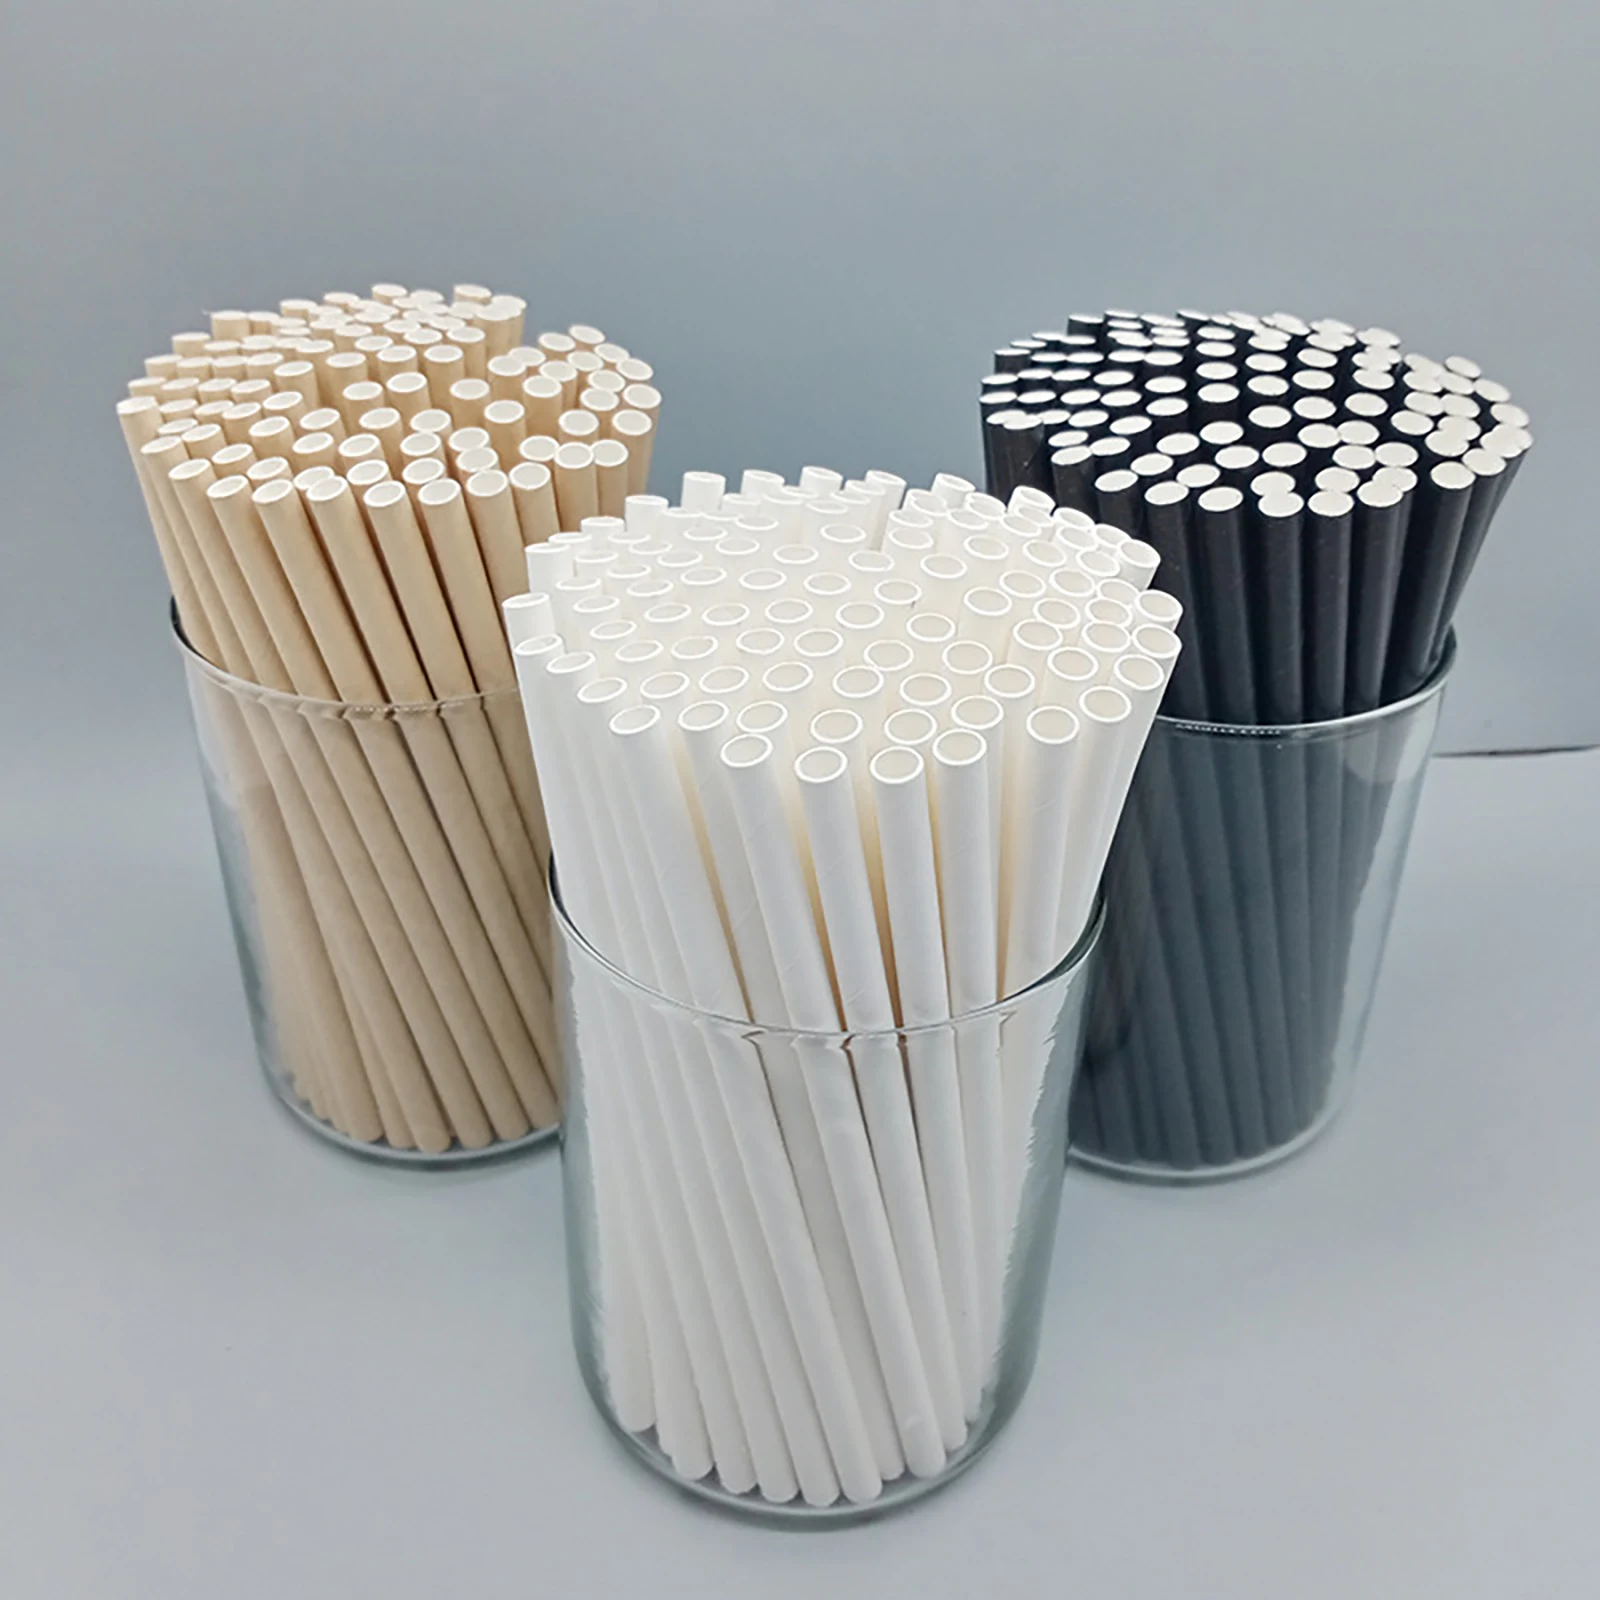 100pcs Disposable Paper Drinking Straw Eco-Friendly Straw For Wedding Party Birthday Decoration Party Supplies Paper Straws